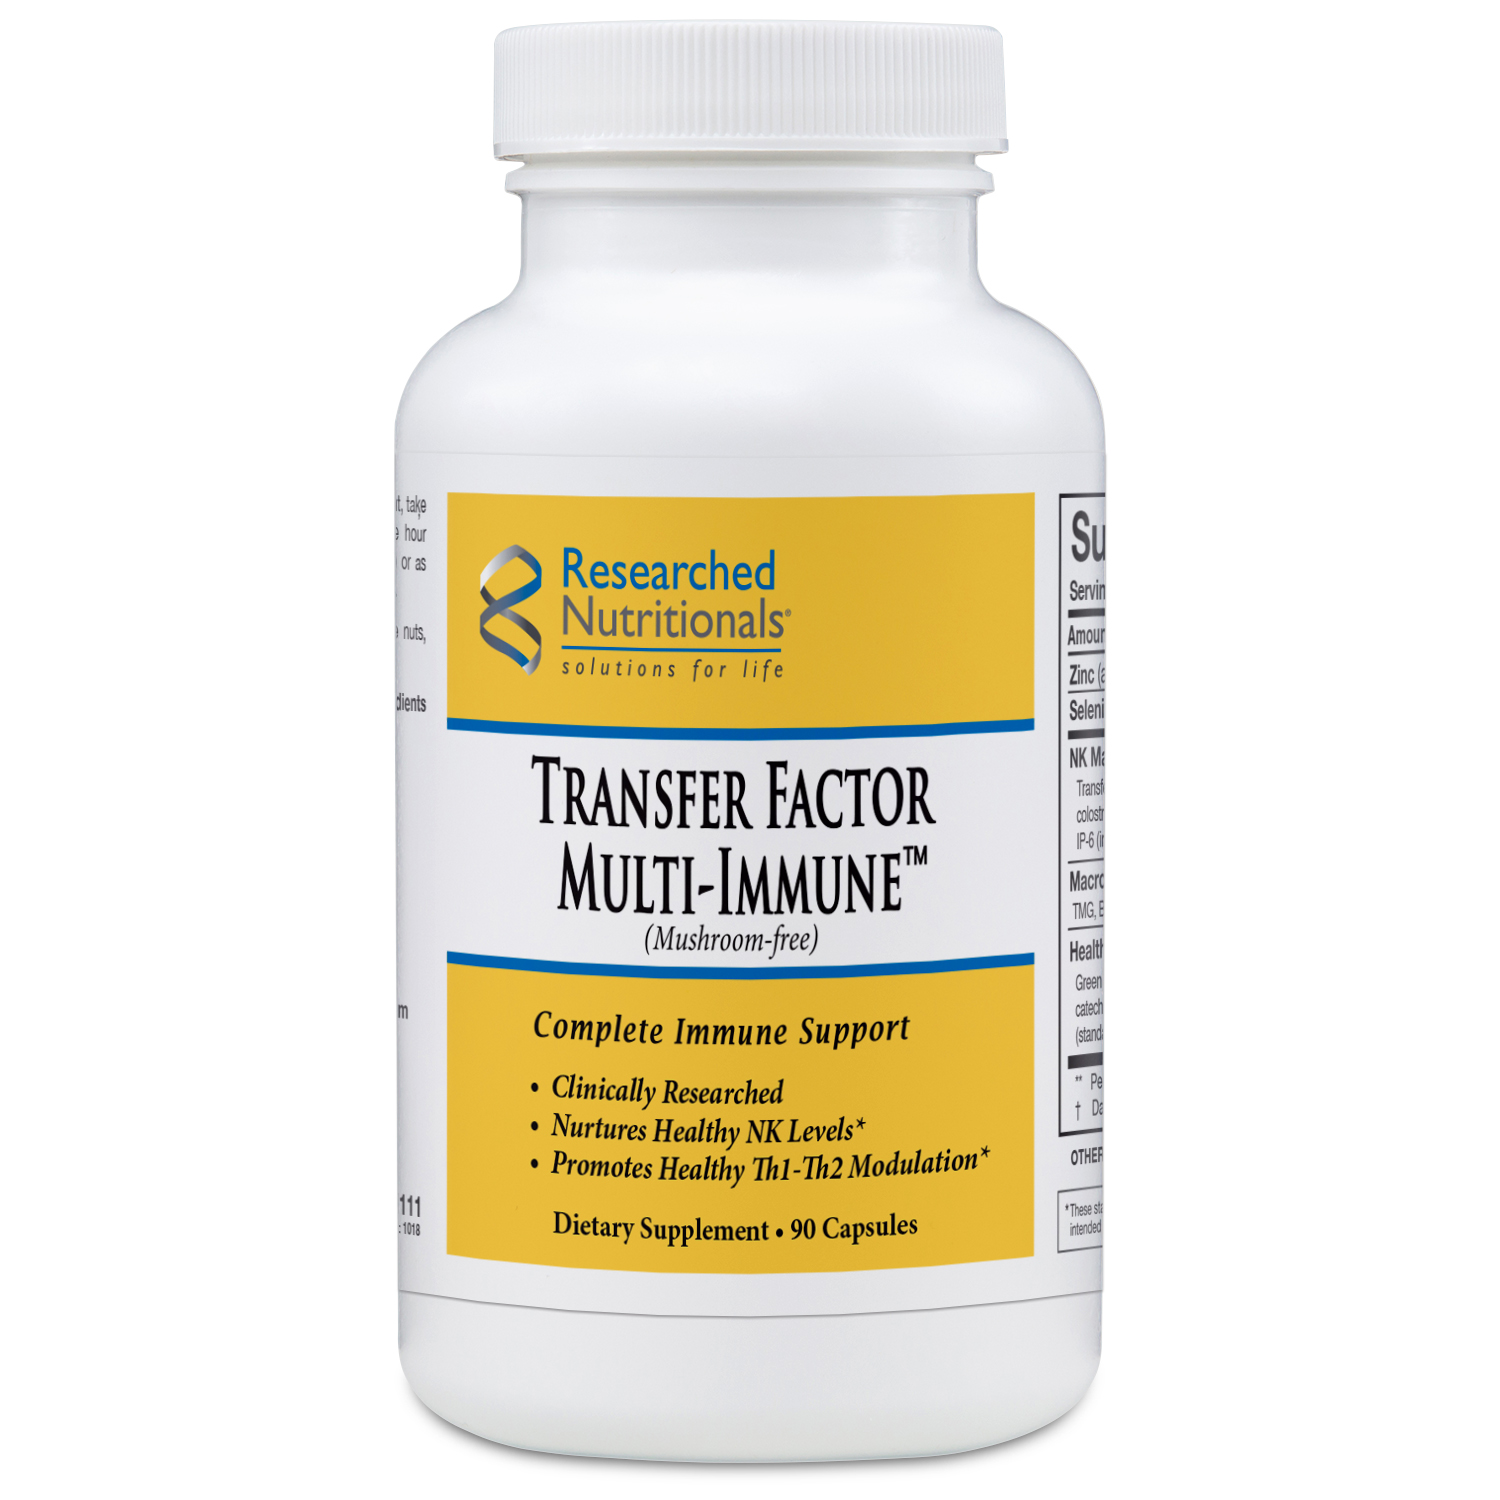 RESEARCHED NUTRITIONALS - Transfer Factor Multi-Immune (Mushroom-free)